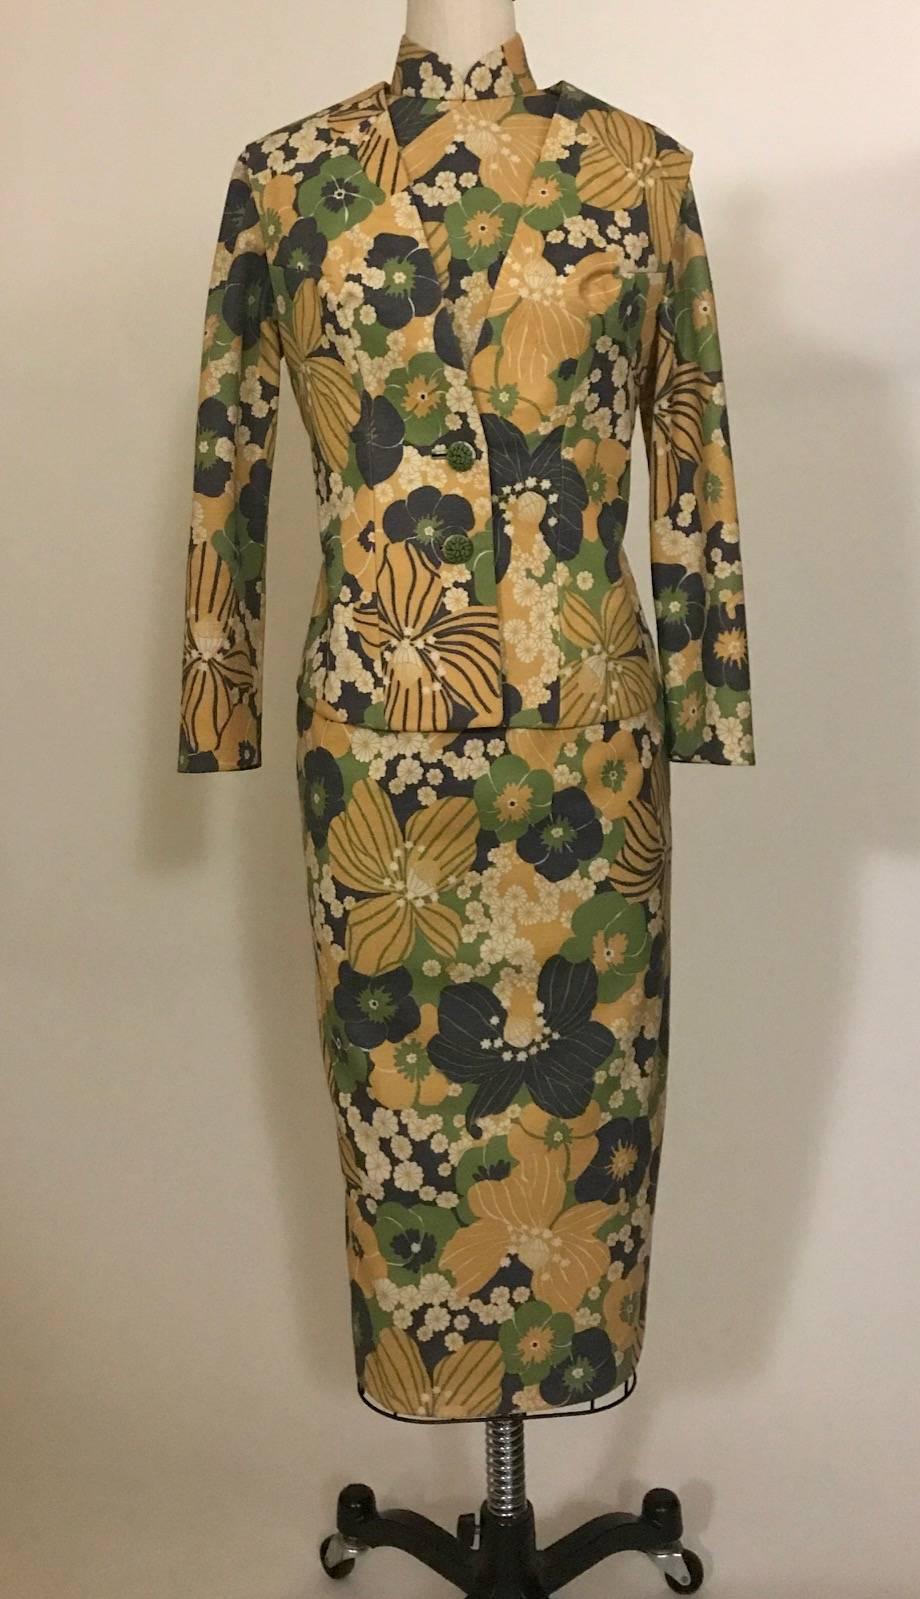 Long sleeve floral print cheongsam dress with matching vest in muted tones of gold, green, navy and cream. Estimated decade 1960s, but may be more recent. Dress has side zip with hidden snaps at chest and hook and eye at neck. Vest fastens with two